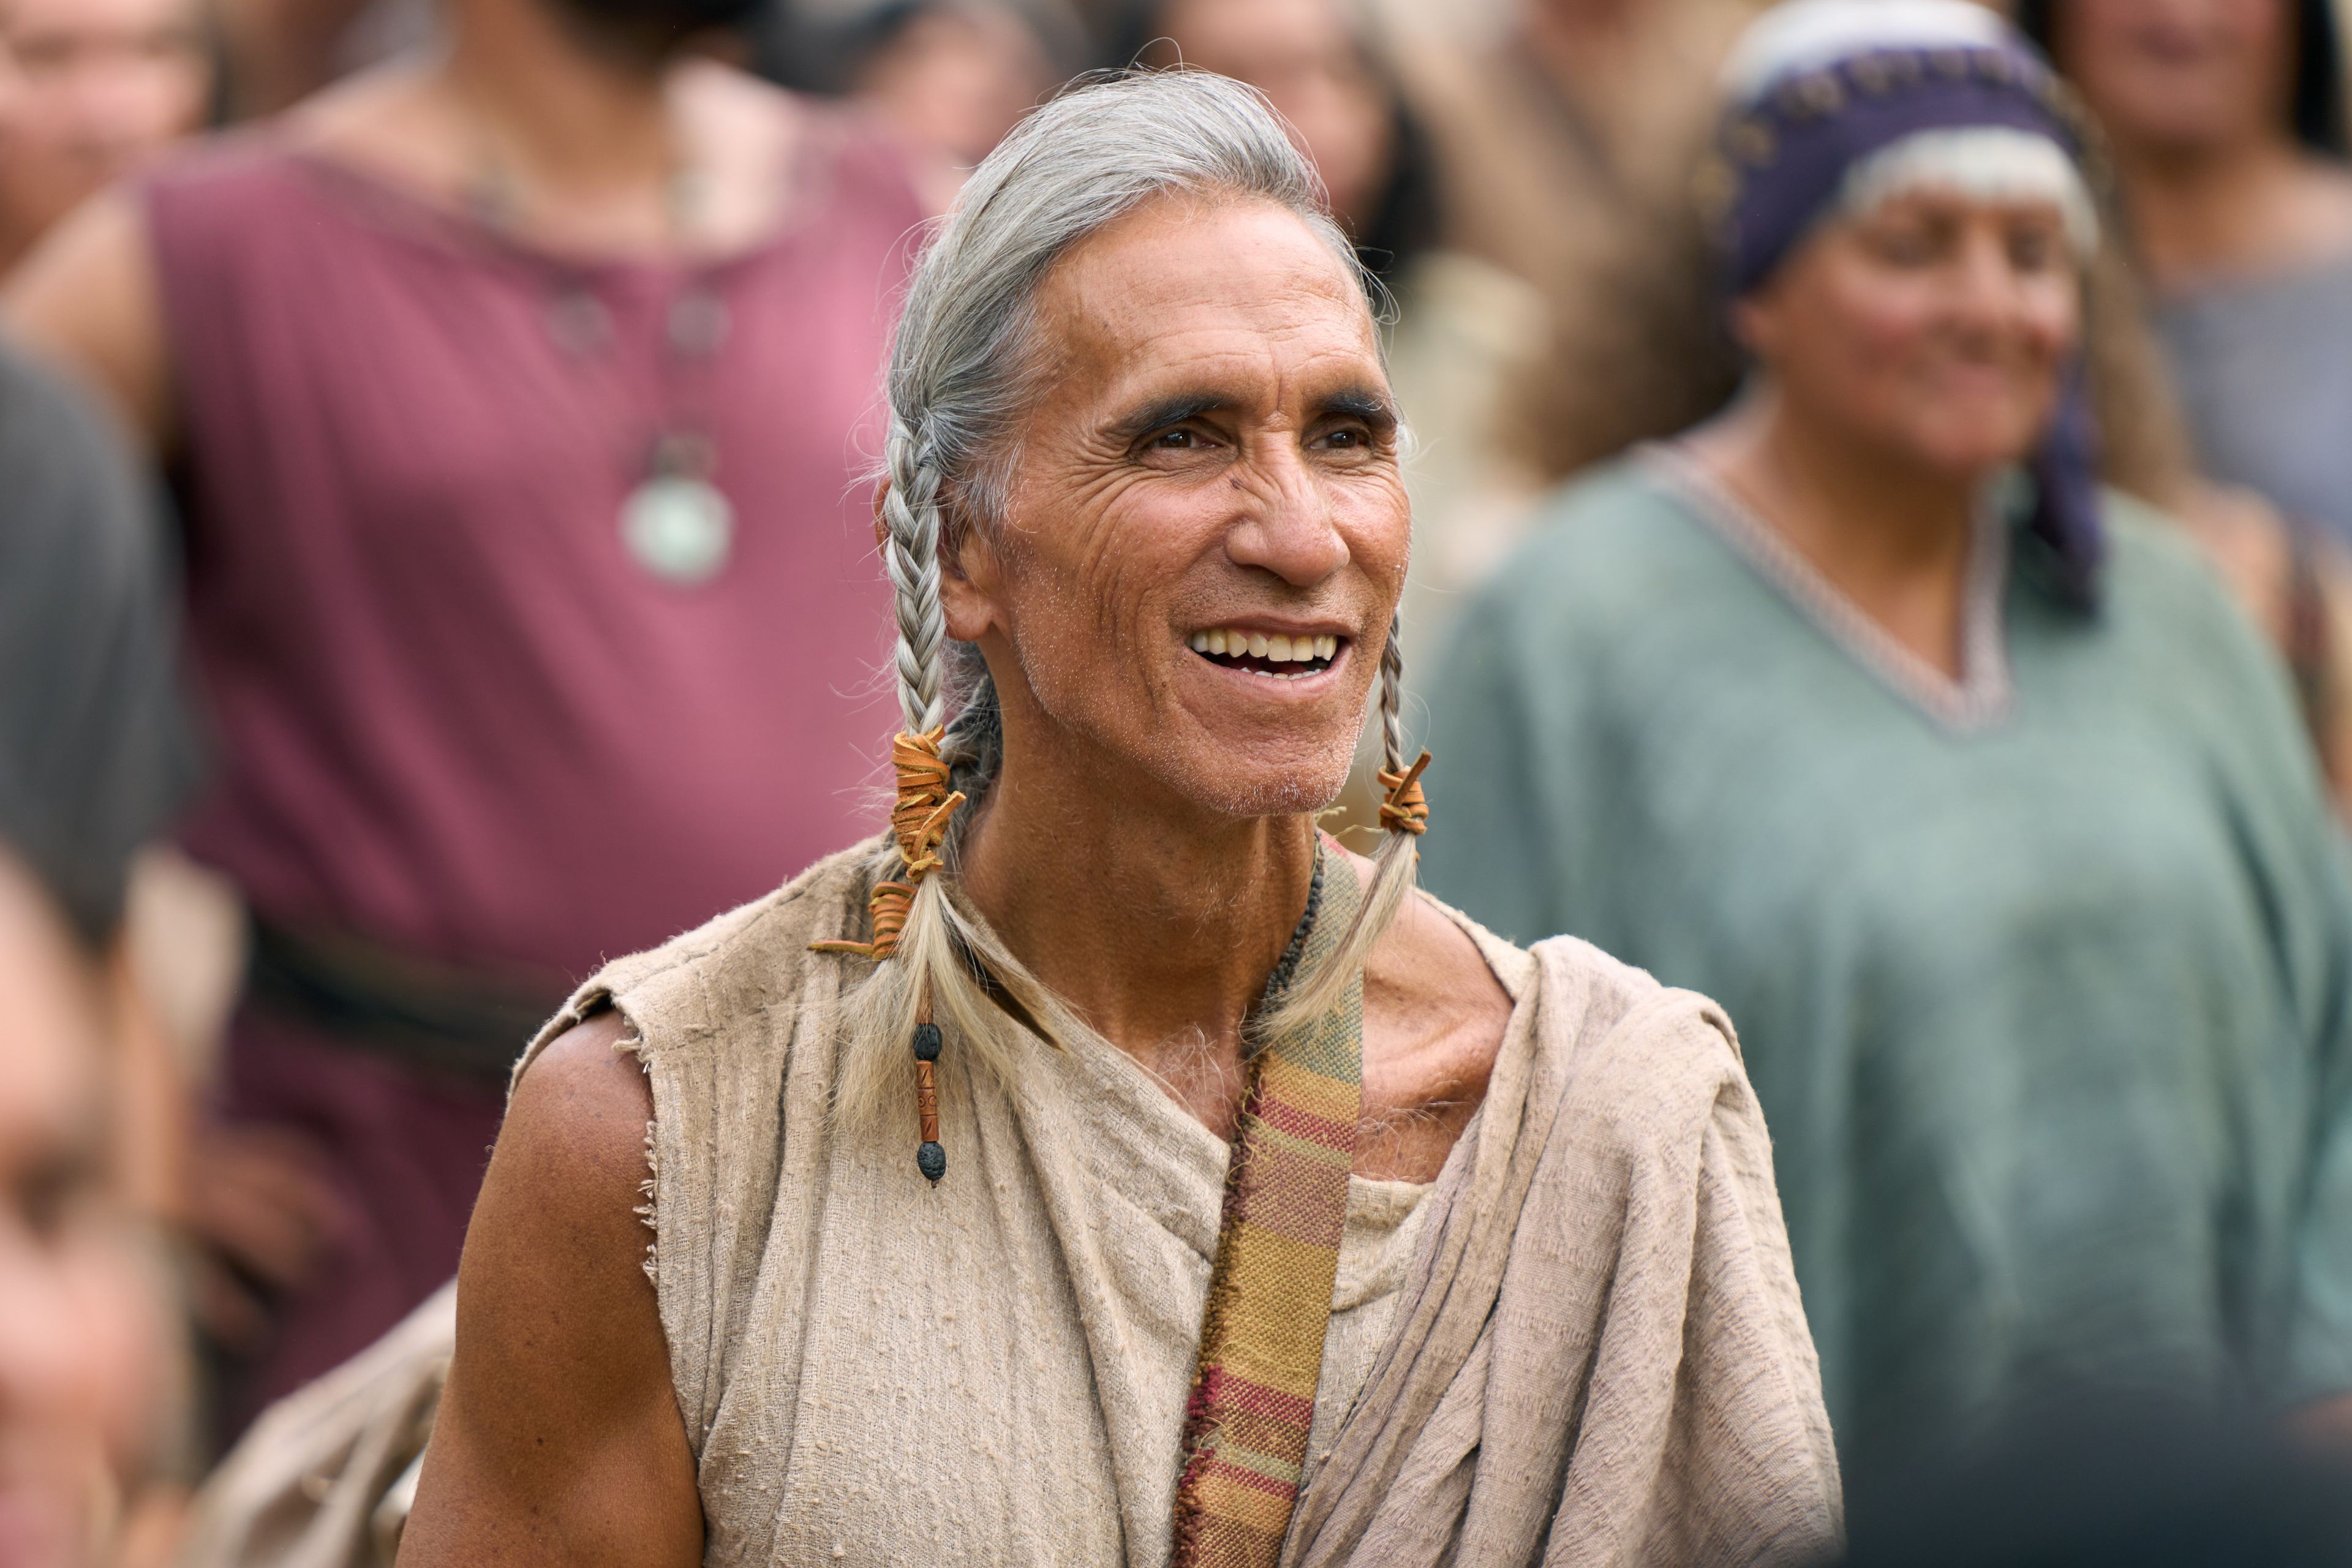 A man smiles as he watches the resurrected Savior, Jesus Christ, minister to the people in the ancient Americas.